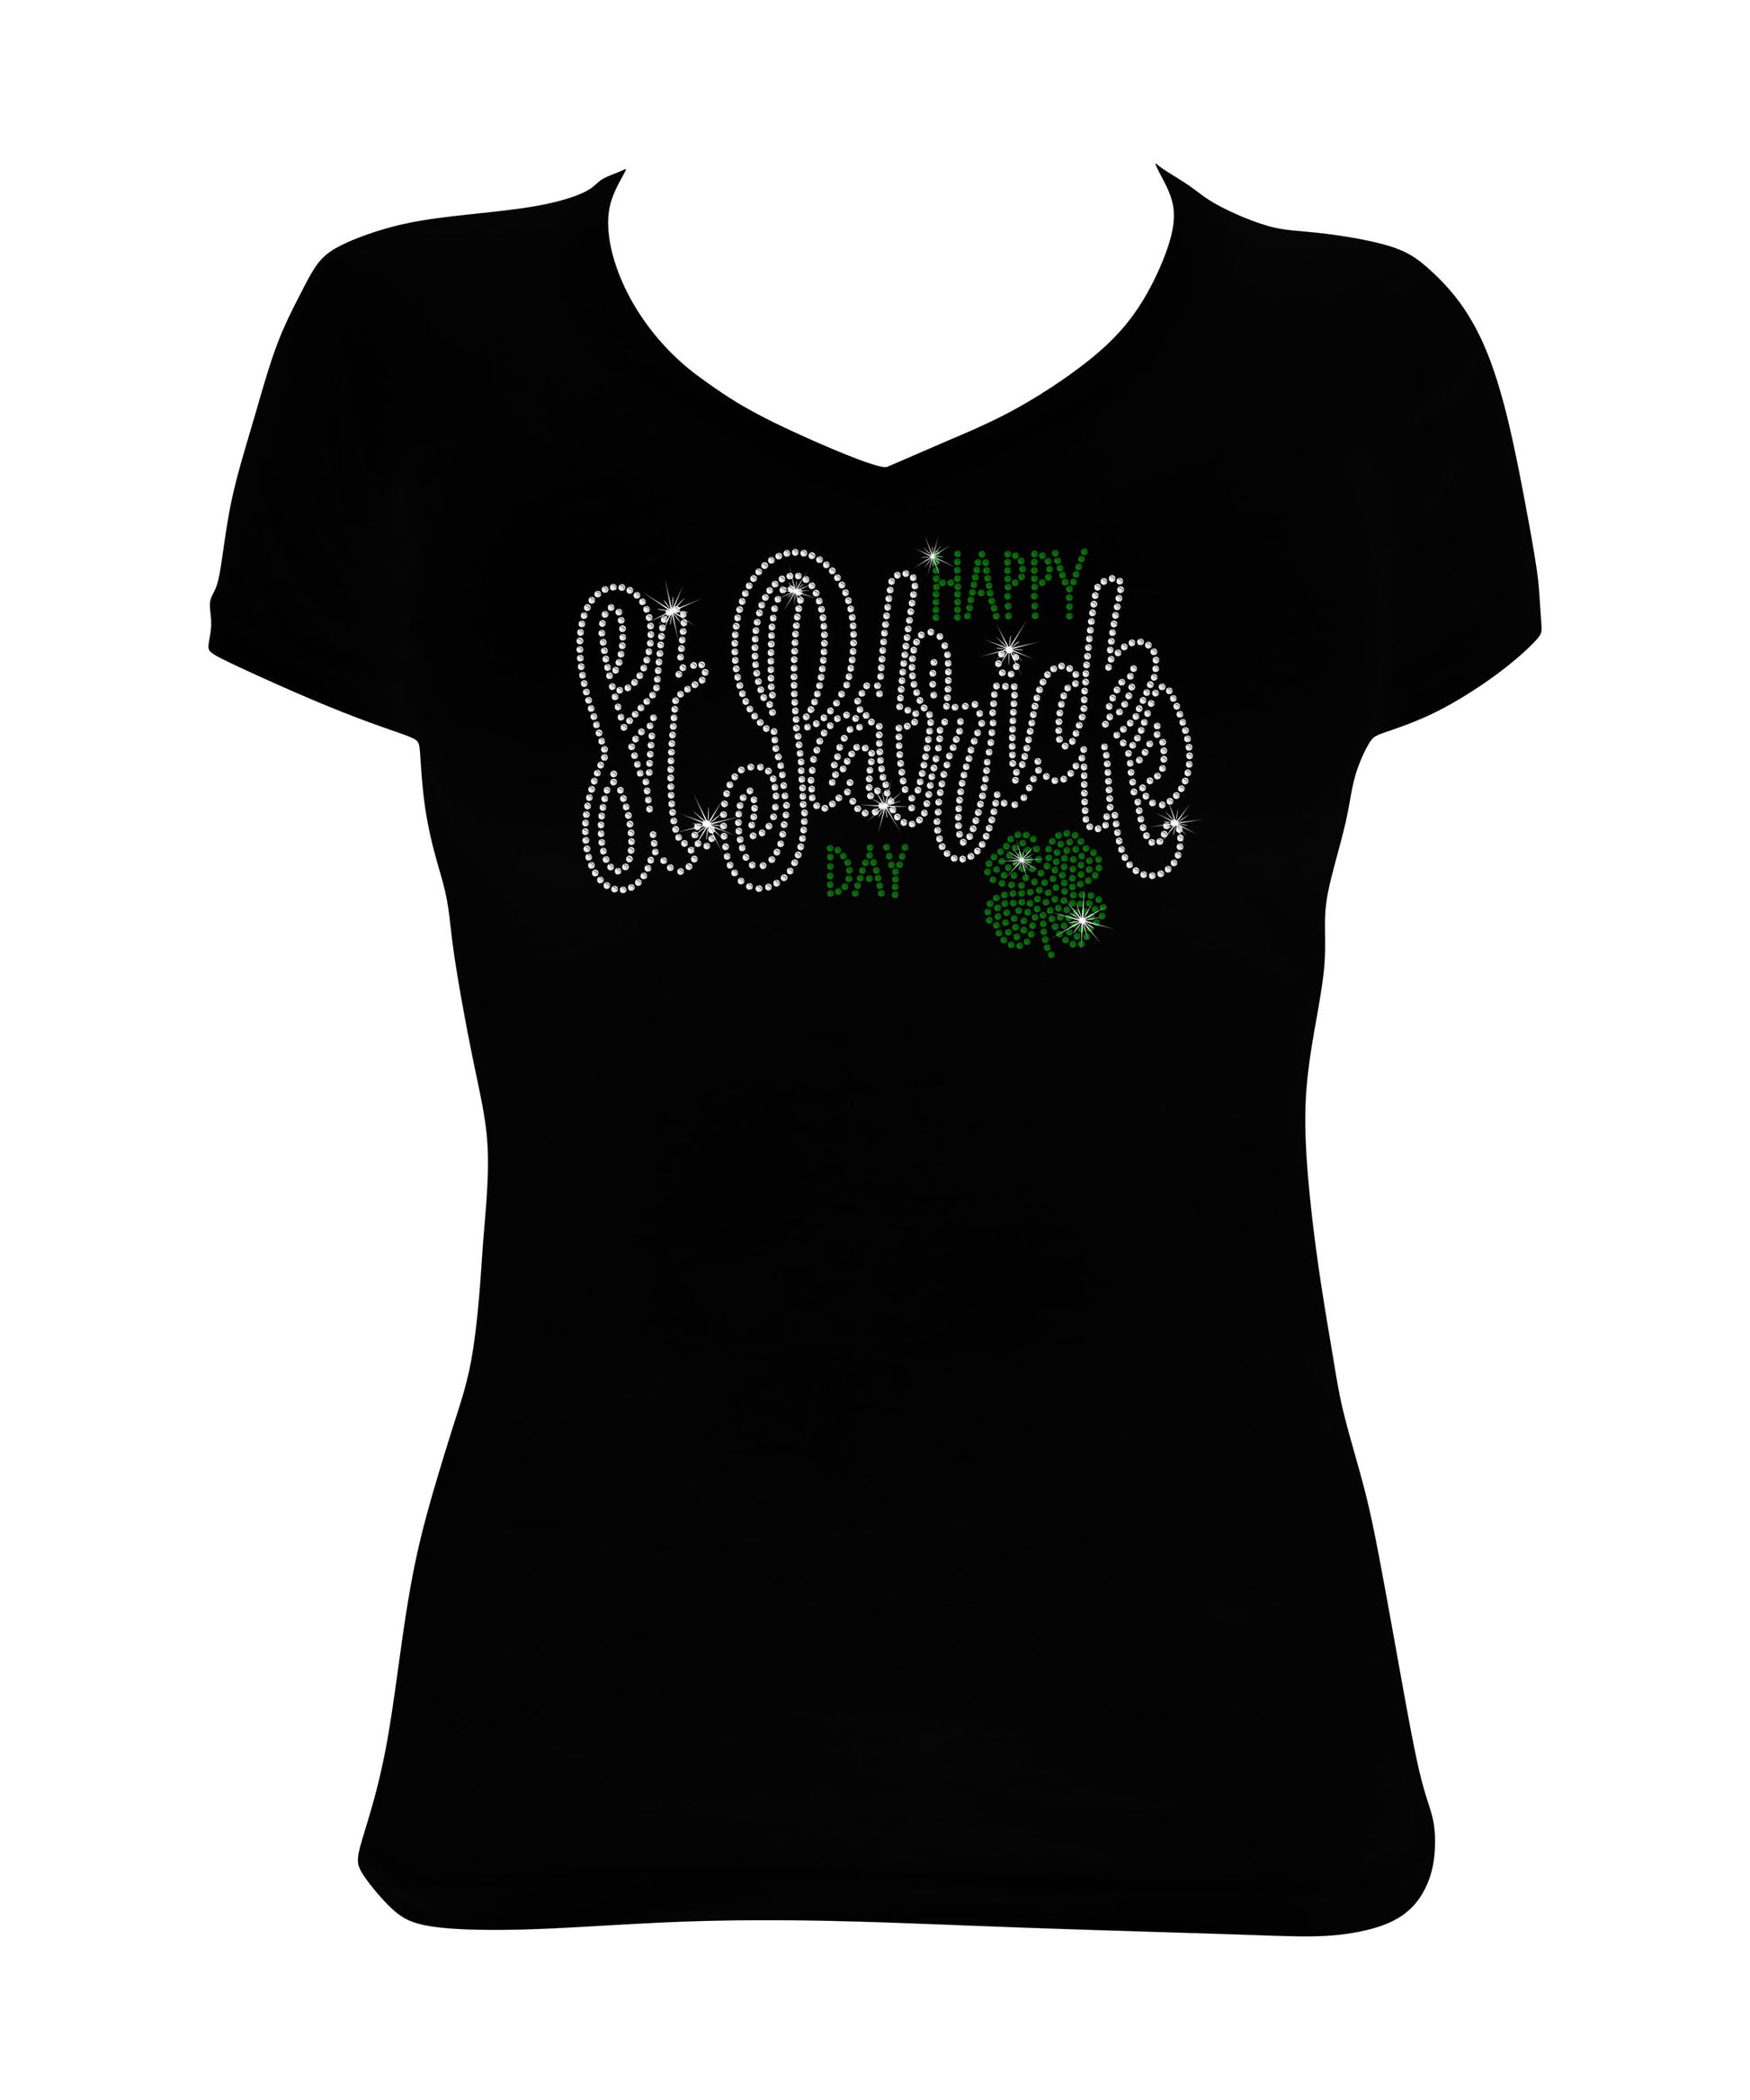 St. Particks Day with Green Clover - St. Patrics Day Shirt